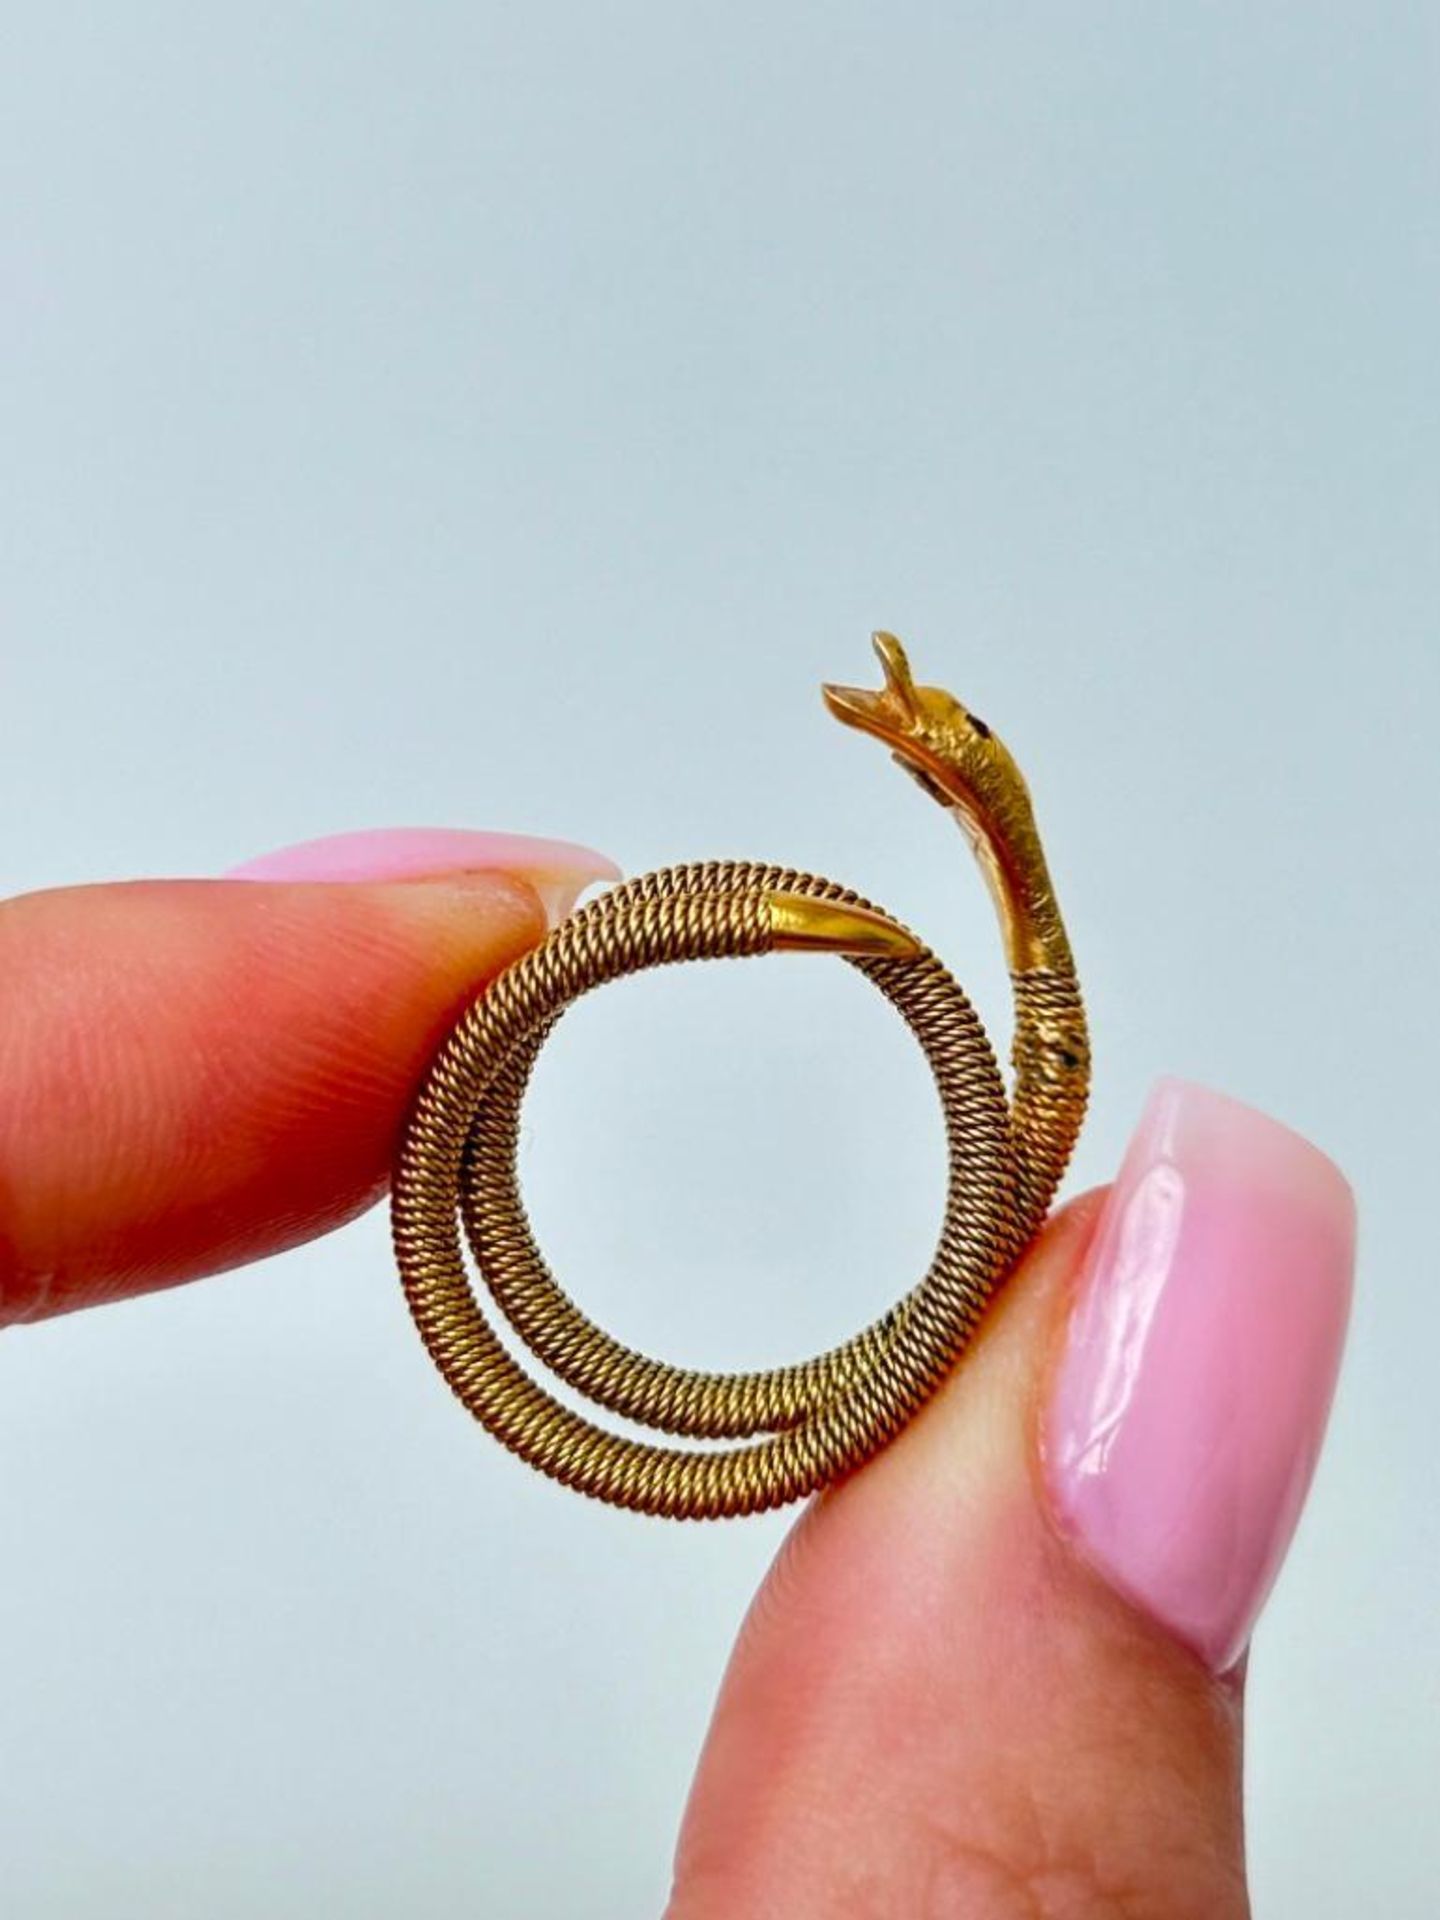 Antique Gold Coiled Snake Ring - Image 2 of 7